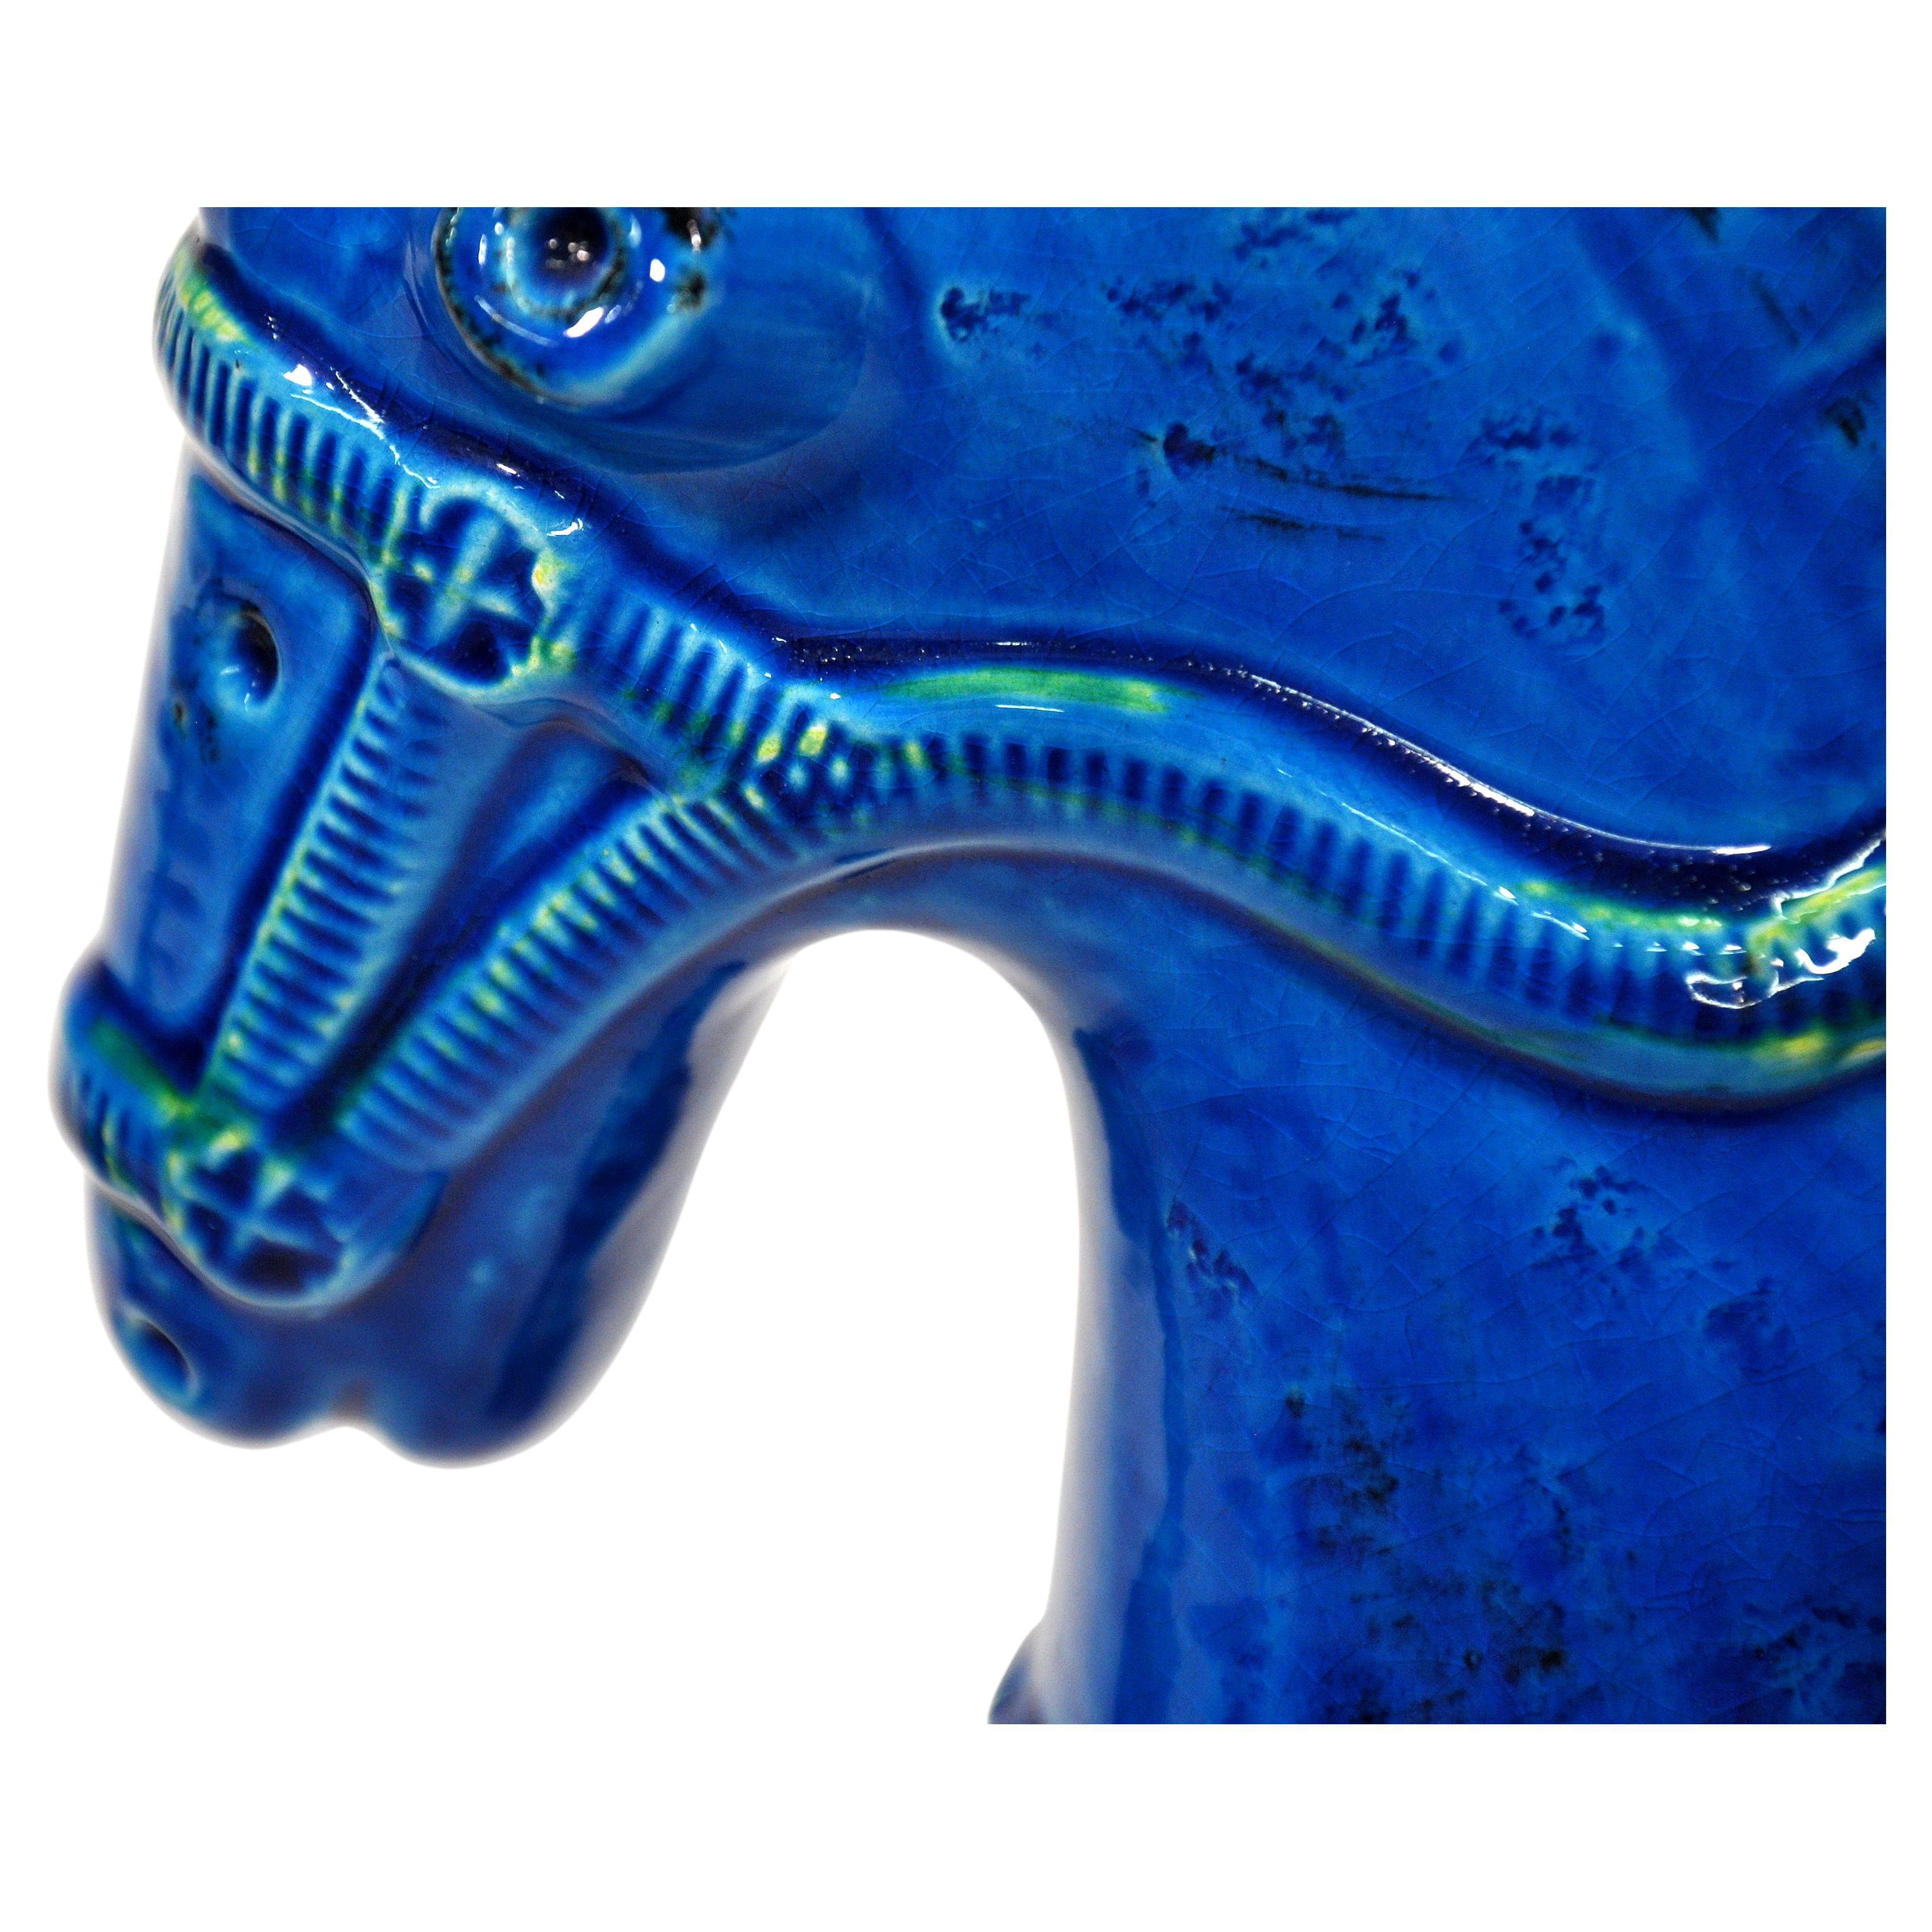 Imposing pair of Italian handmade ceramic horse sculptures in the vibrant signature blue of Aldo Londi's iconic art pottery collection Rimini Blu, originally designed in 1959 for Bitossi Ceramiche and imported by Raymor in the 1960s. The deep blue